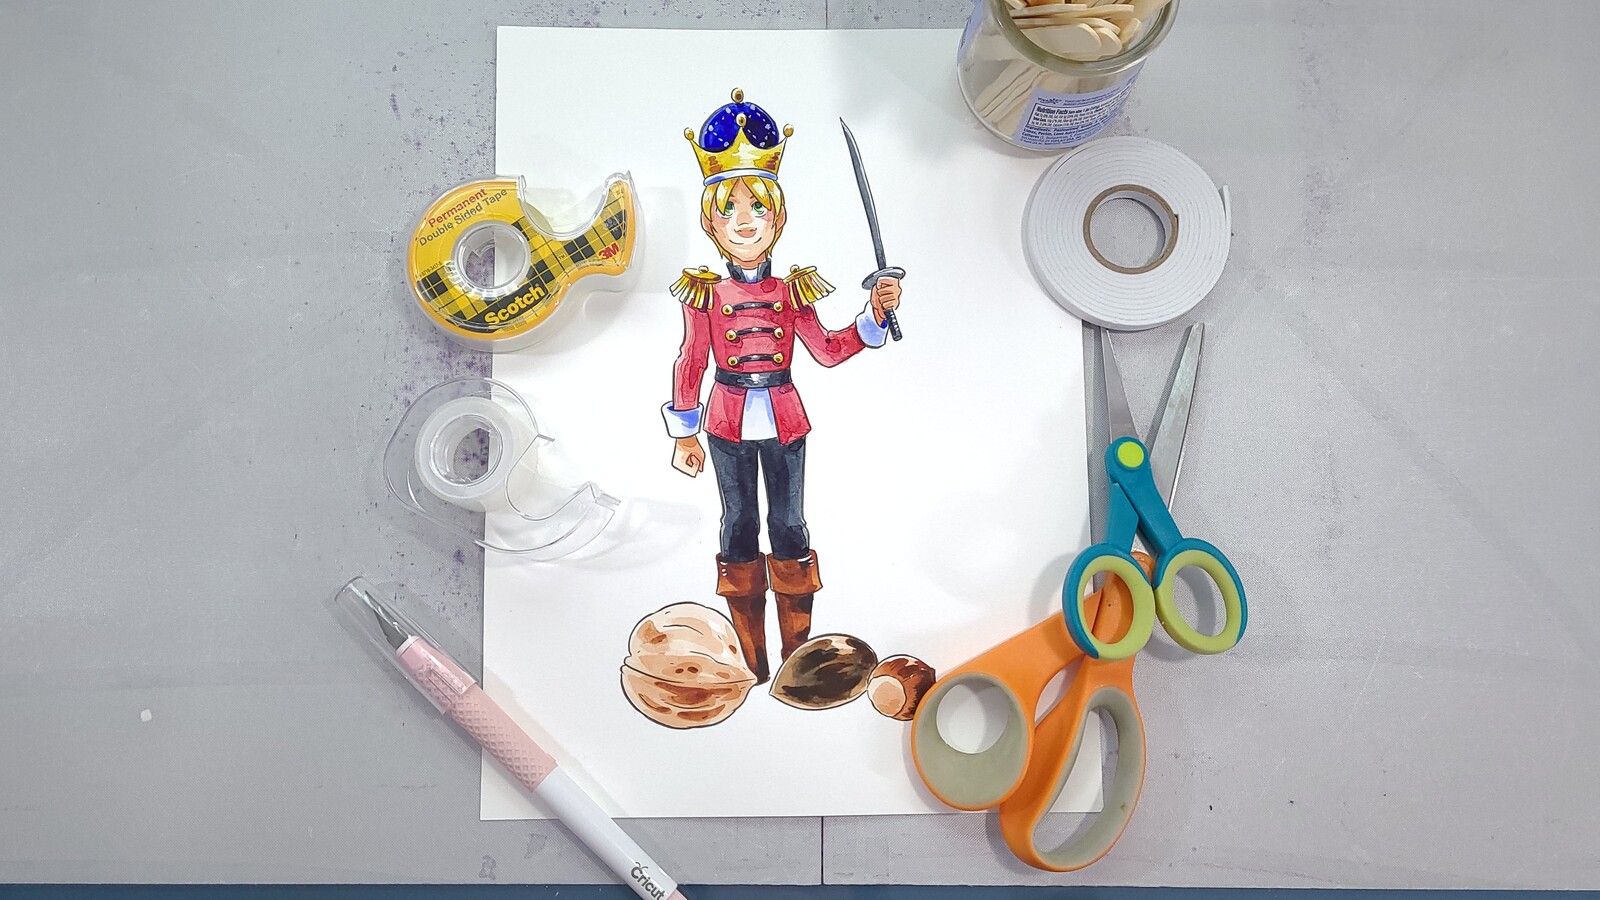 Papercraftmas Day 8: The Nutcracker Prince with assembly materials
